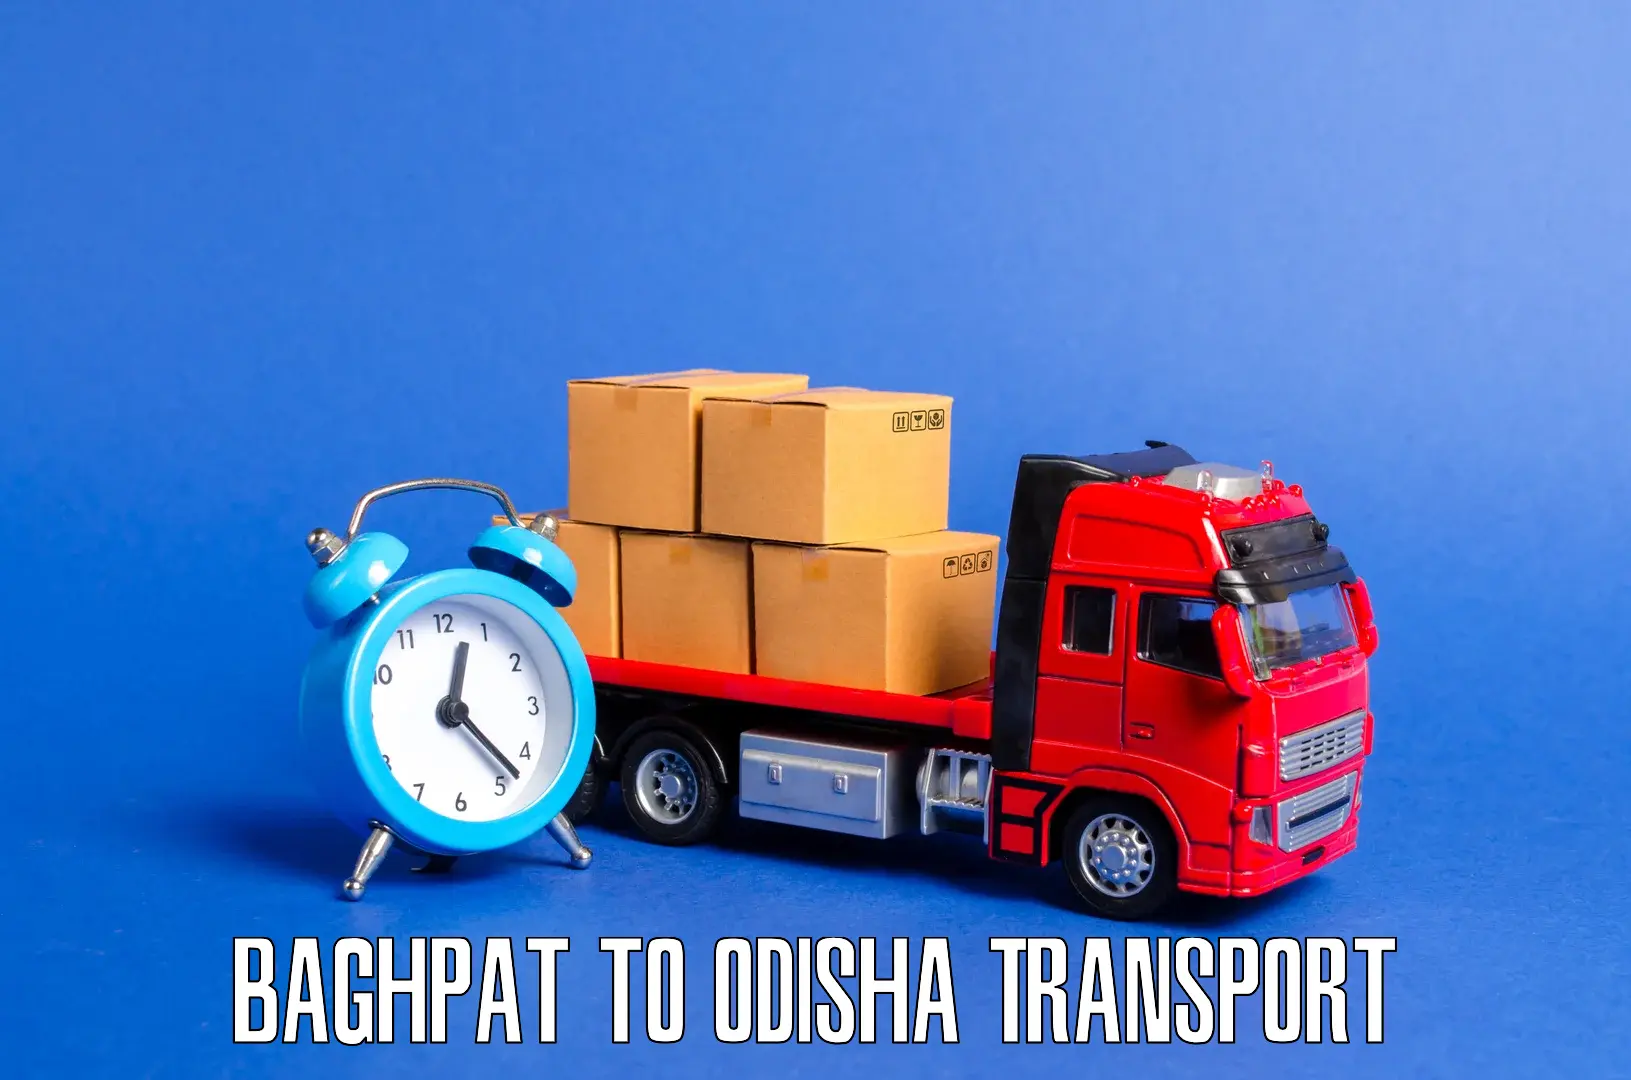 Commercial transport service Baghpat to Muribahal